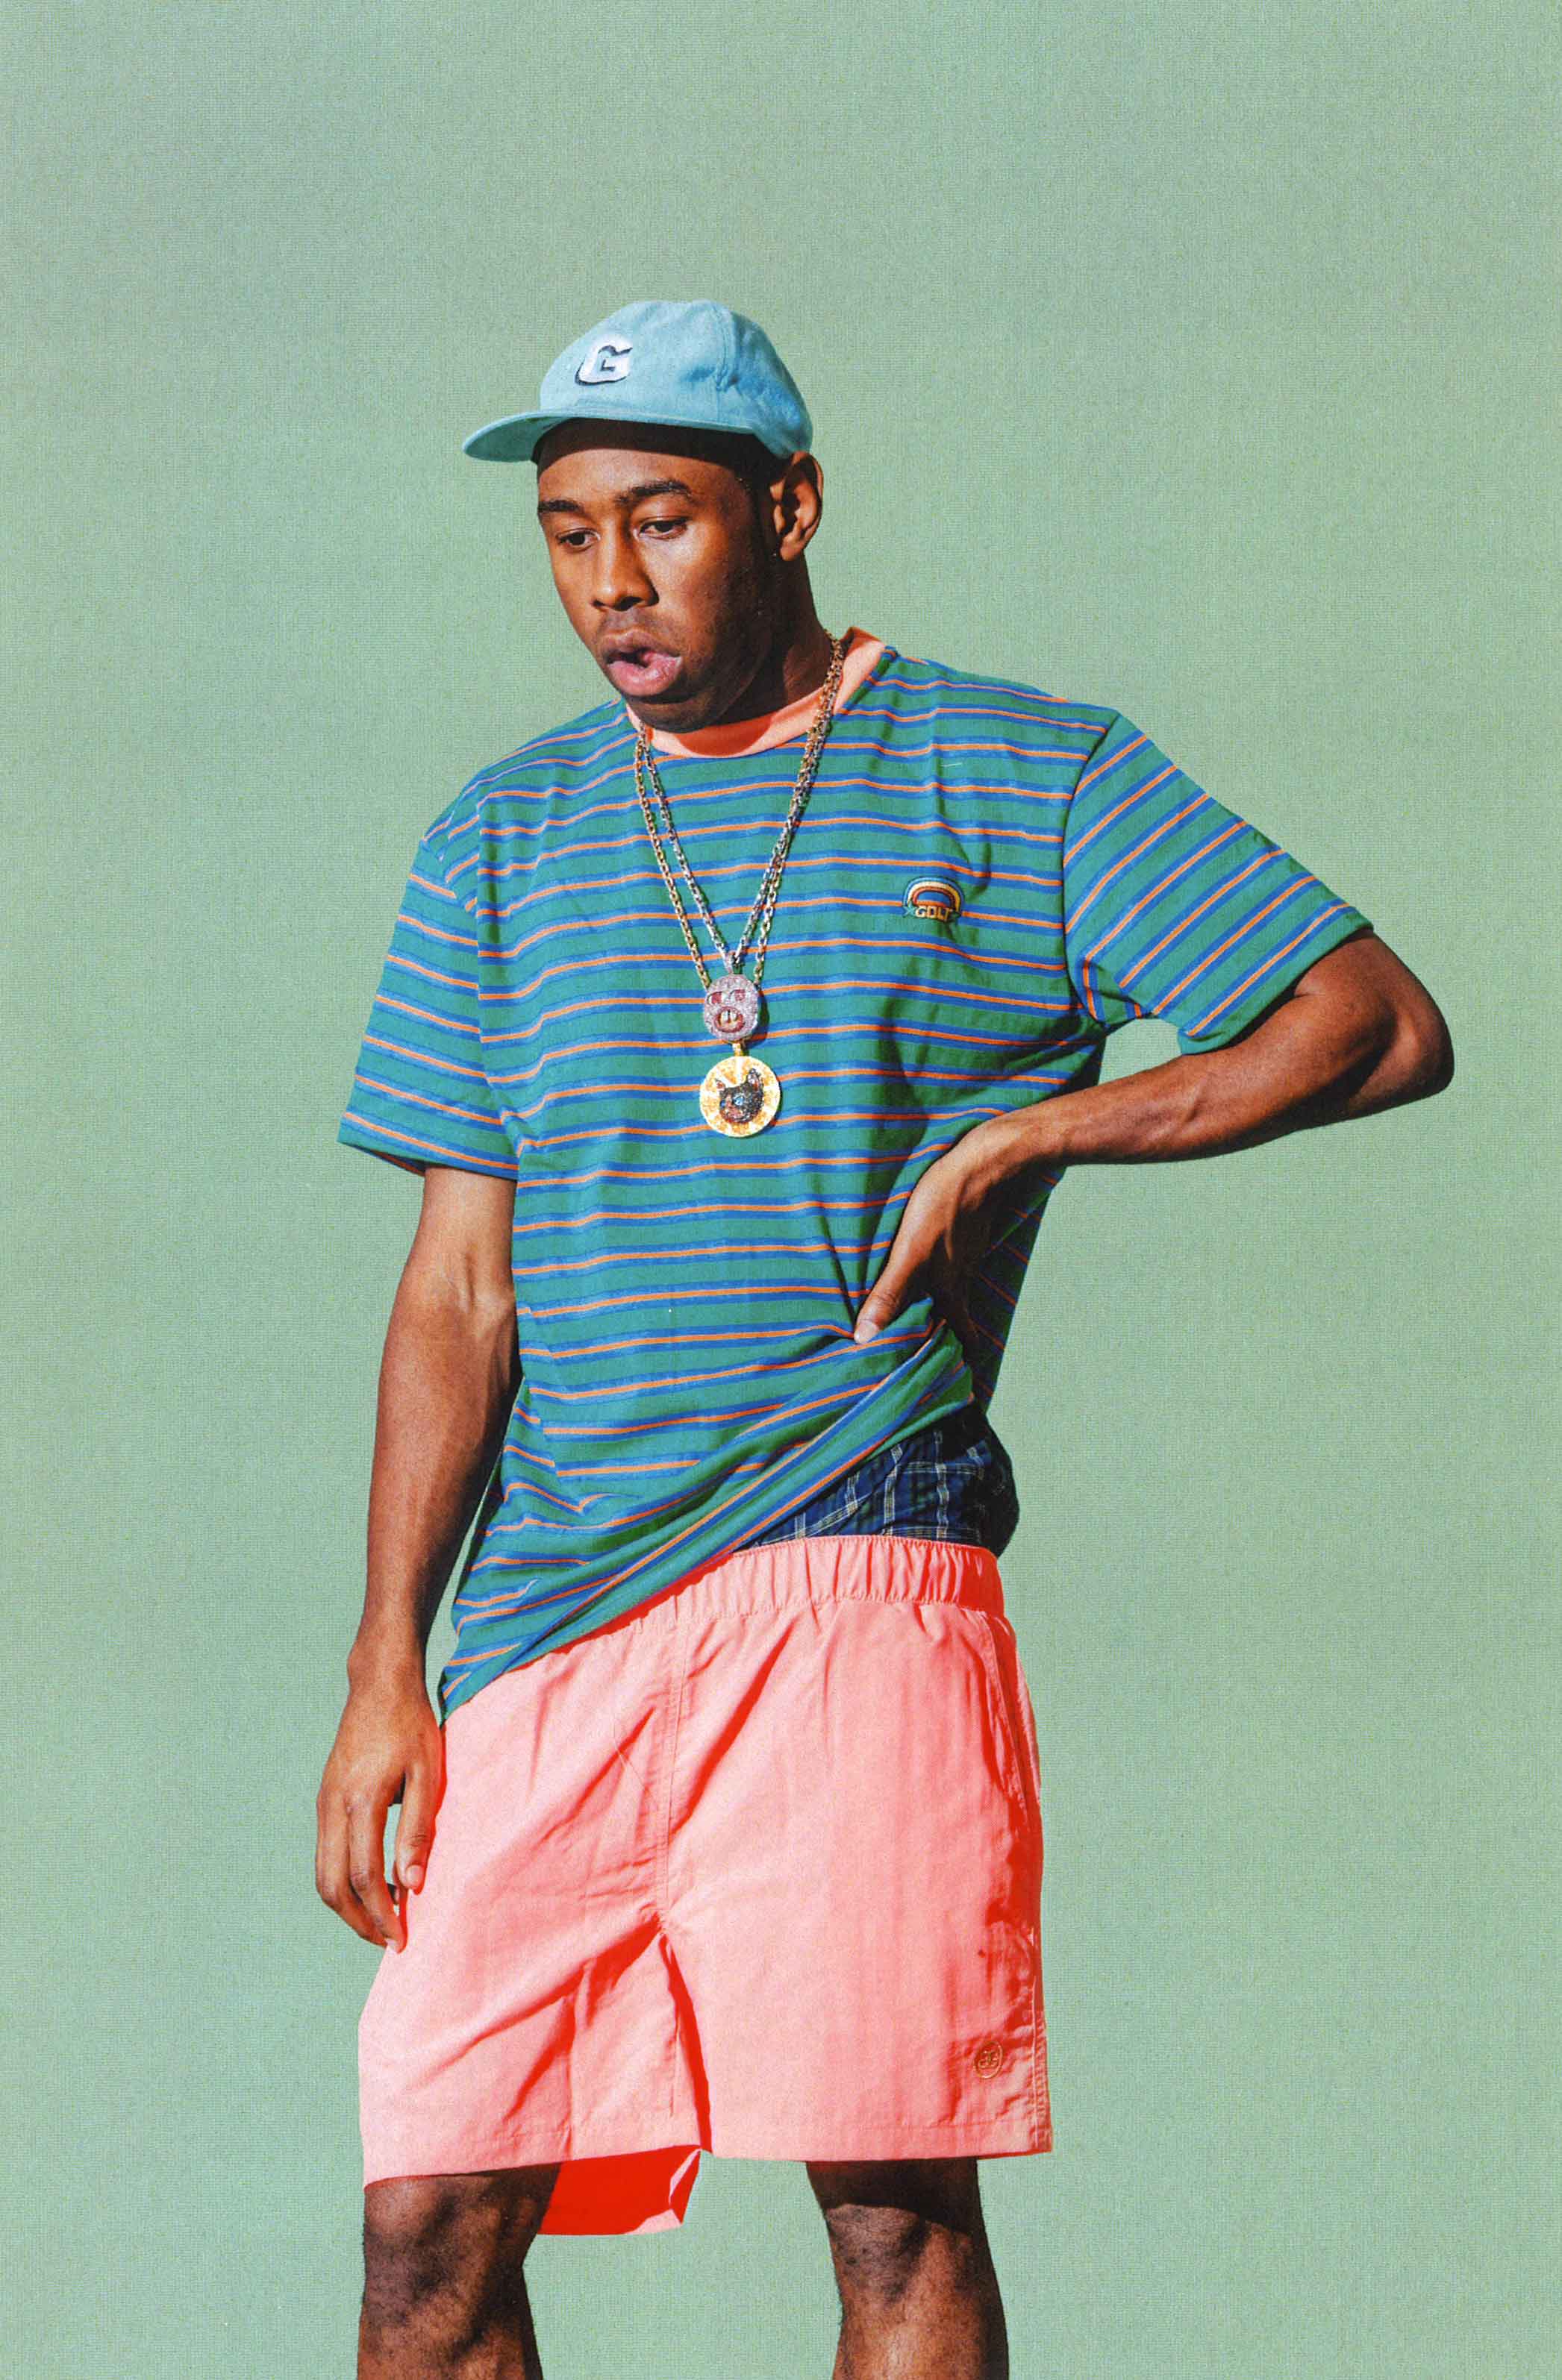 #ClientStyle Golf Wang AW/15 Look-book | Client Magazine